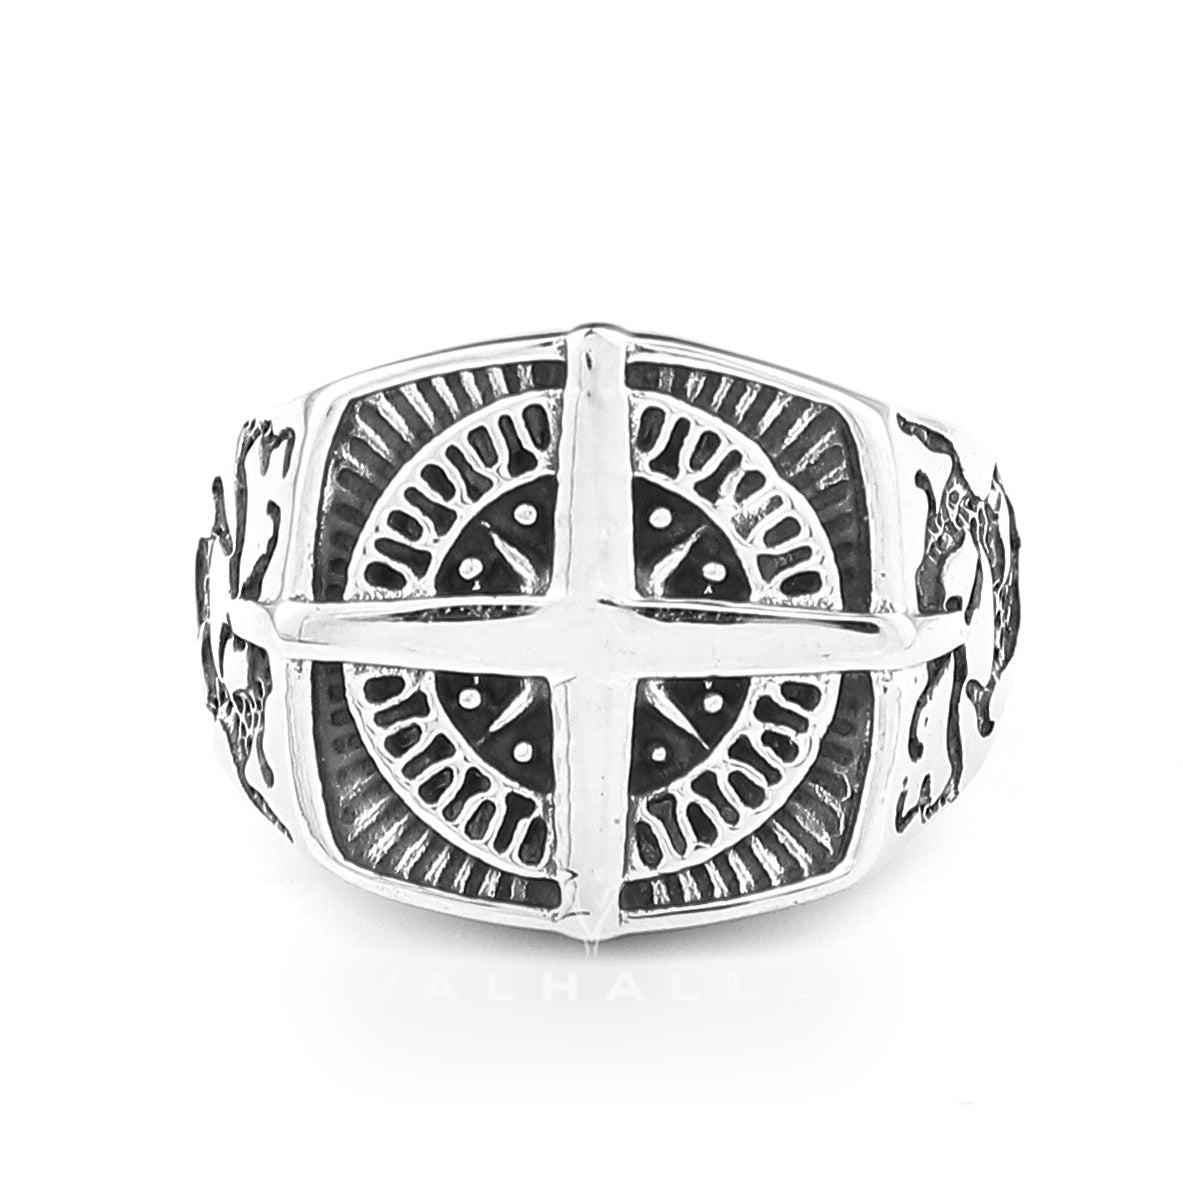 Pirate Compass Cross Stainless Steel Ring